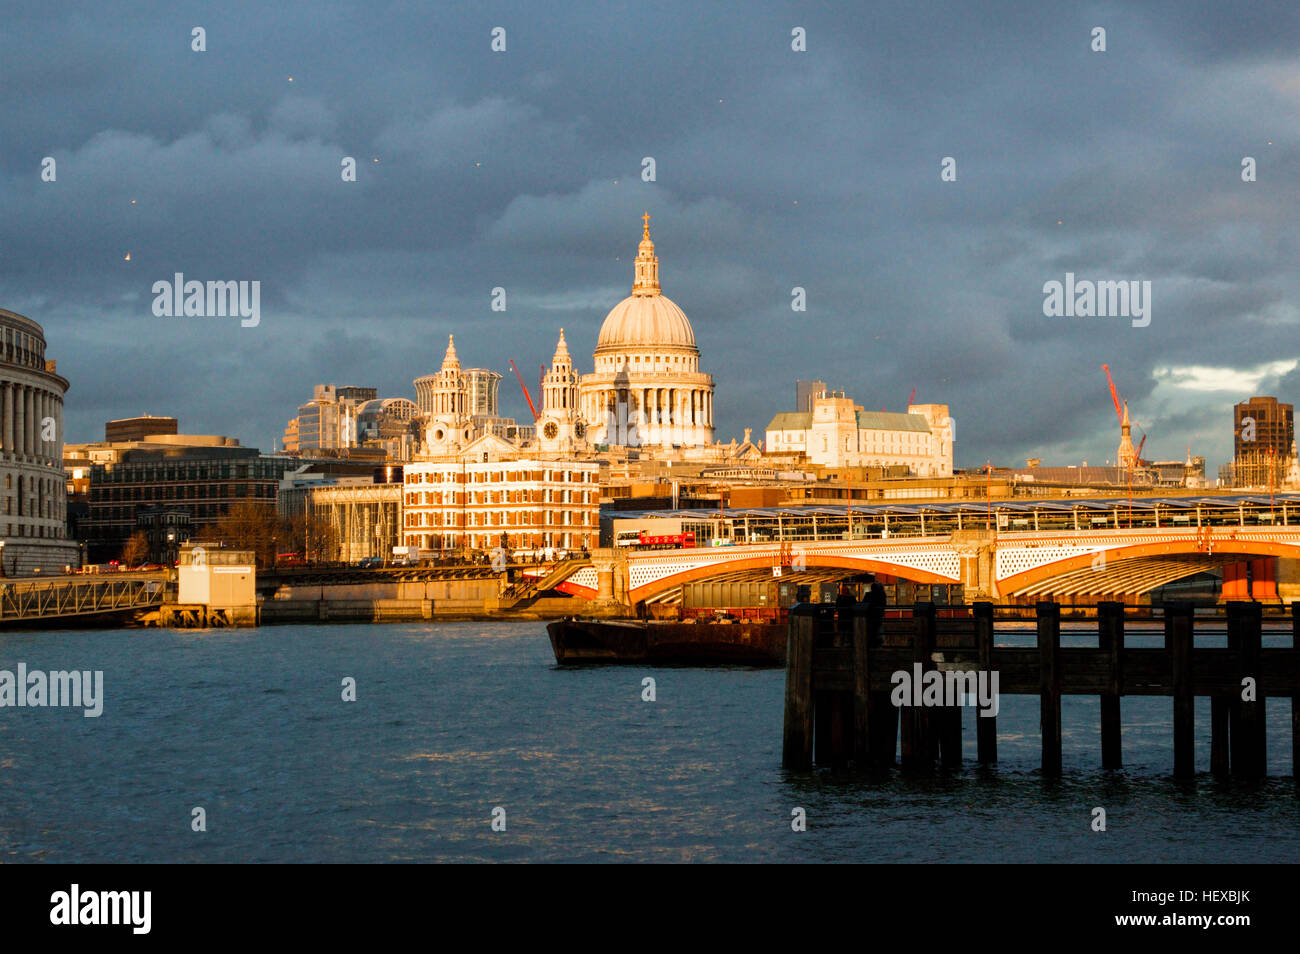 Cityscape of London, precisely the Blackfriars Bridge with St. Paul’s Cathedral in the background. Stock Photo